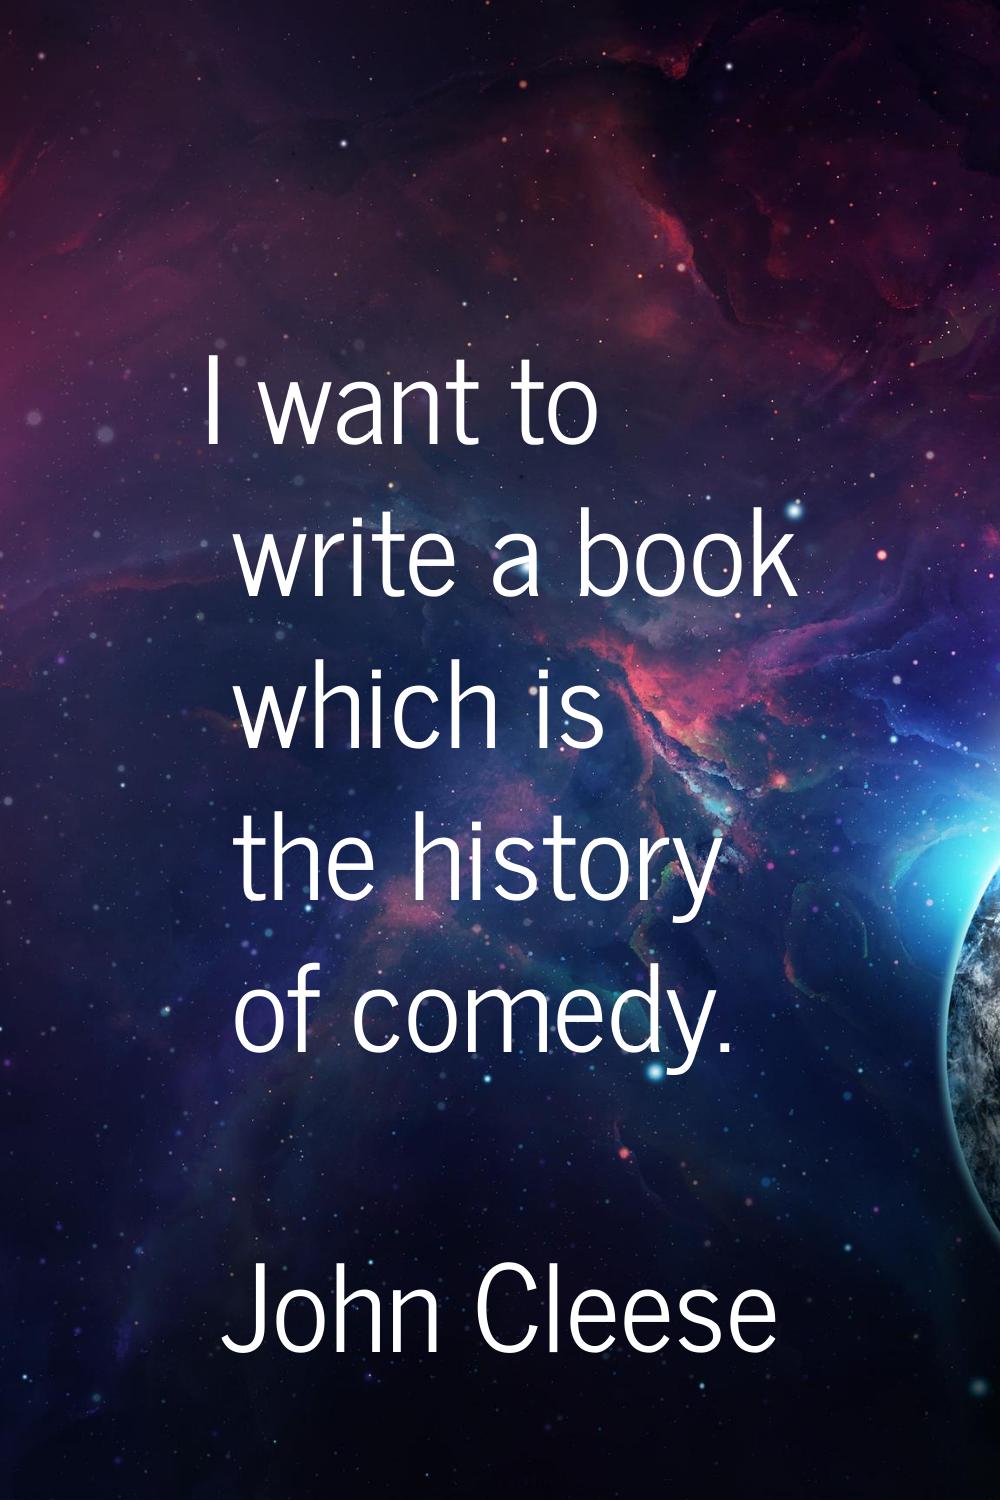 I want to write a book which is the history of comedy.